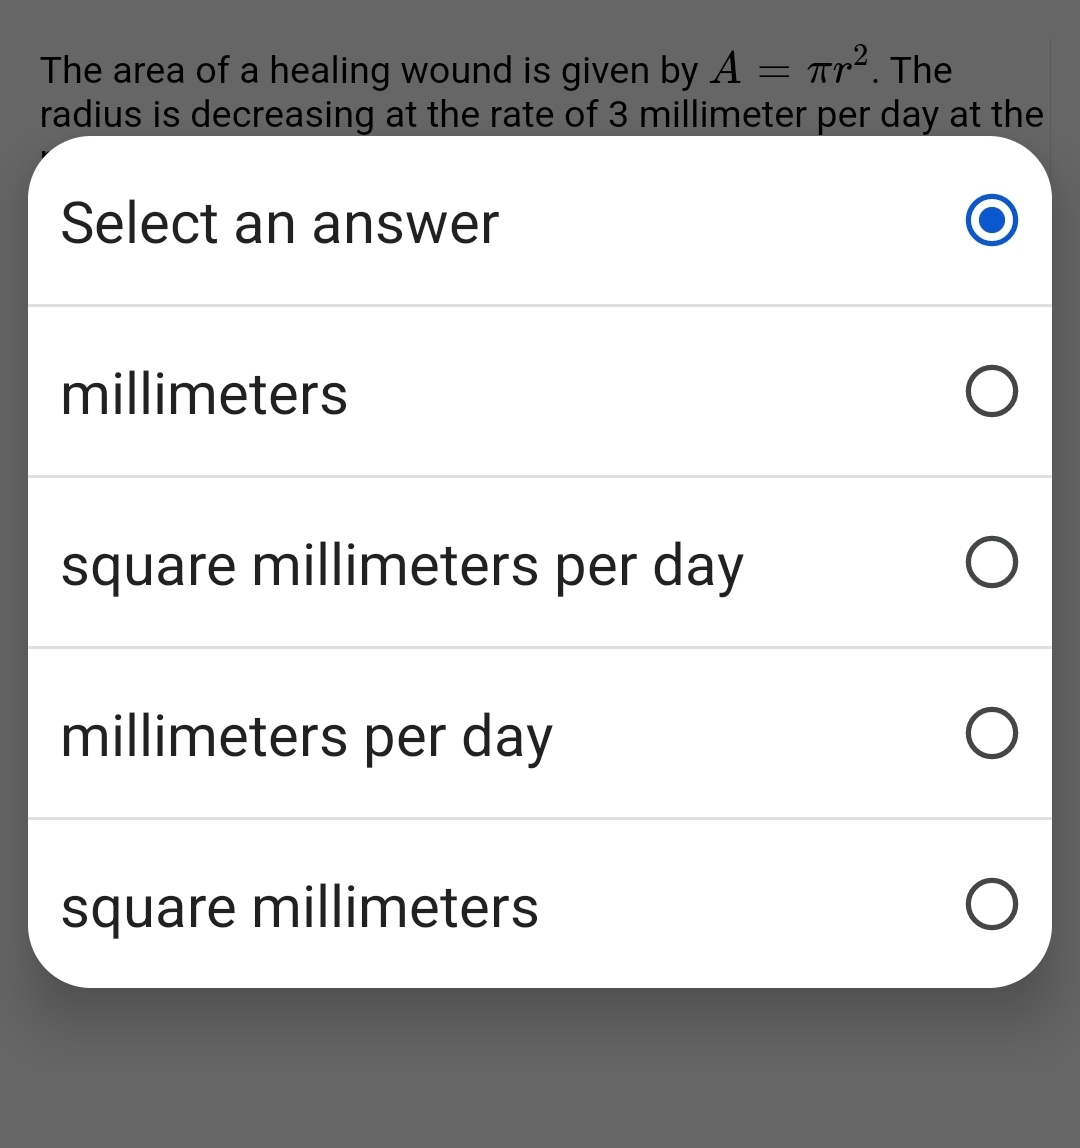 The area of a healing wound is given by A
Tr². The
=
radius is decreasing at the rate of 3 millimeter per day at the
Select an answer
millimeters
square millimeters per day
O
millimeters per day
square millimeters